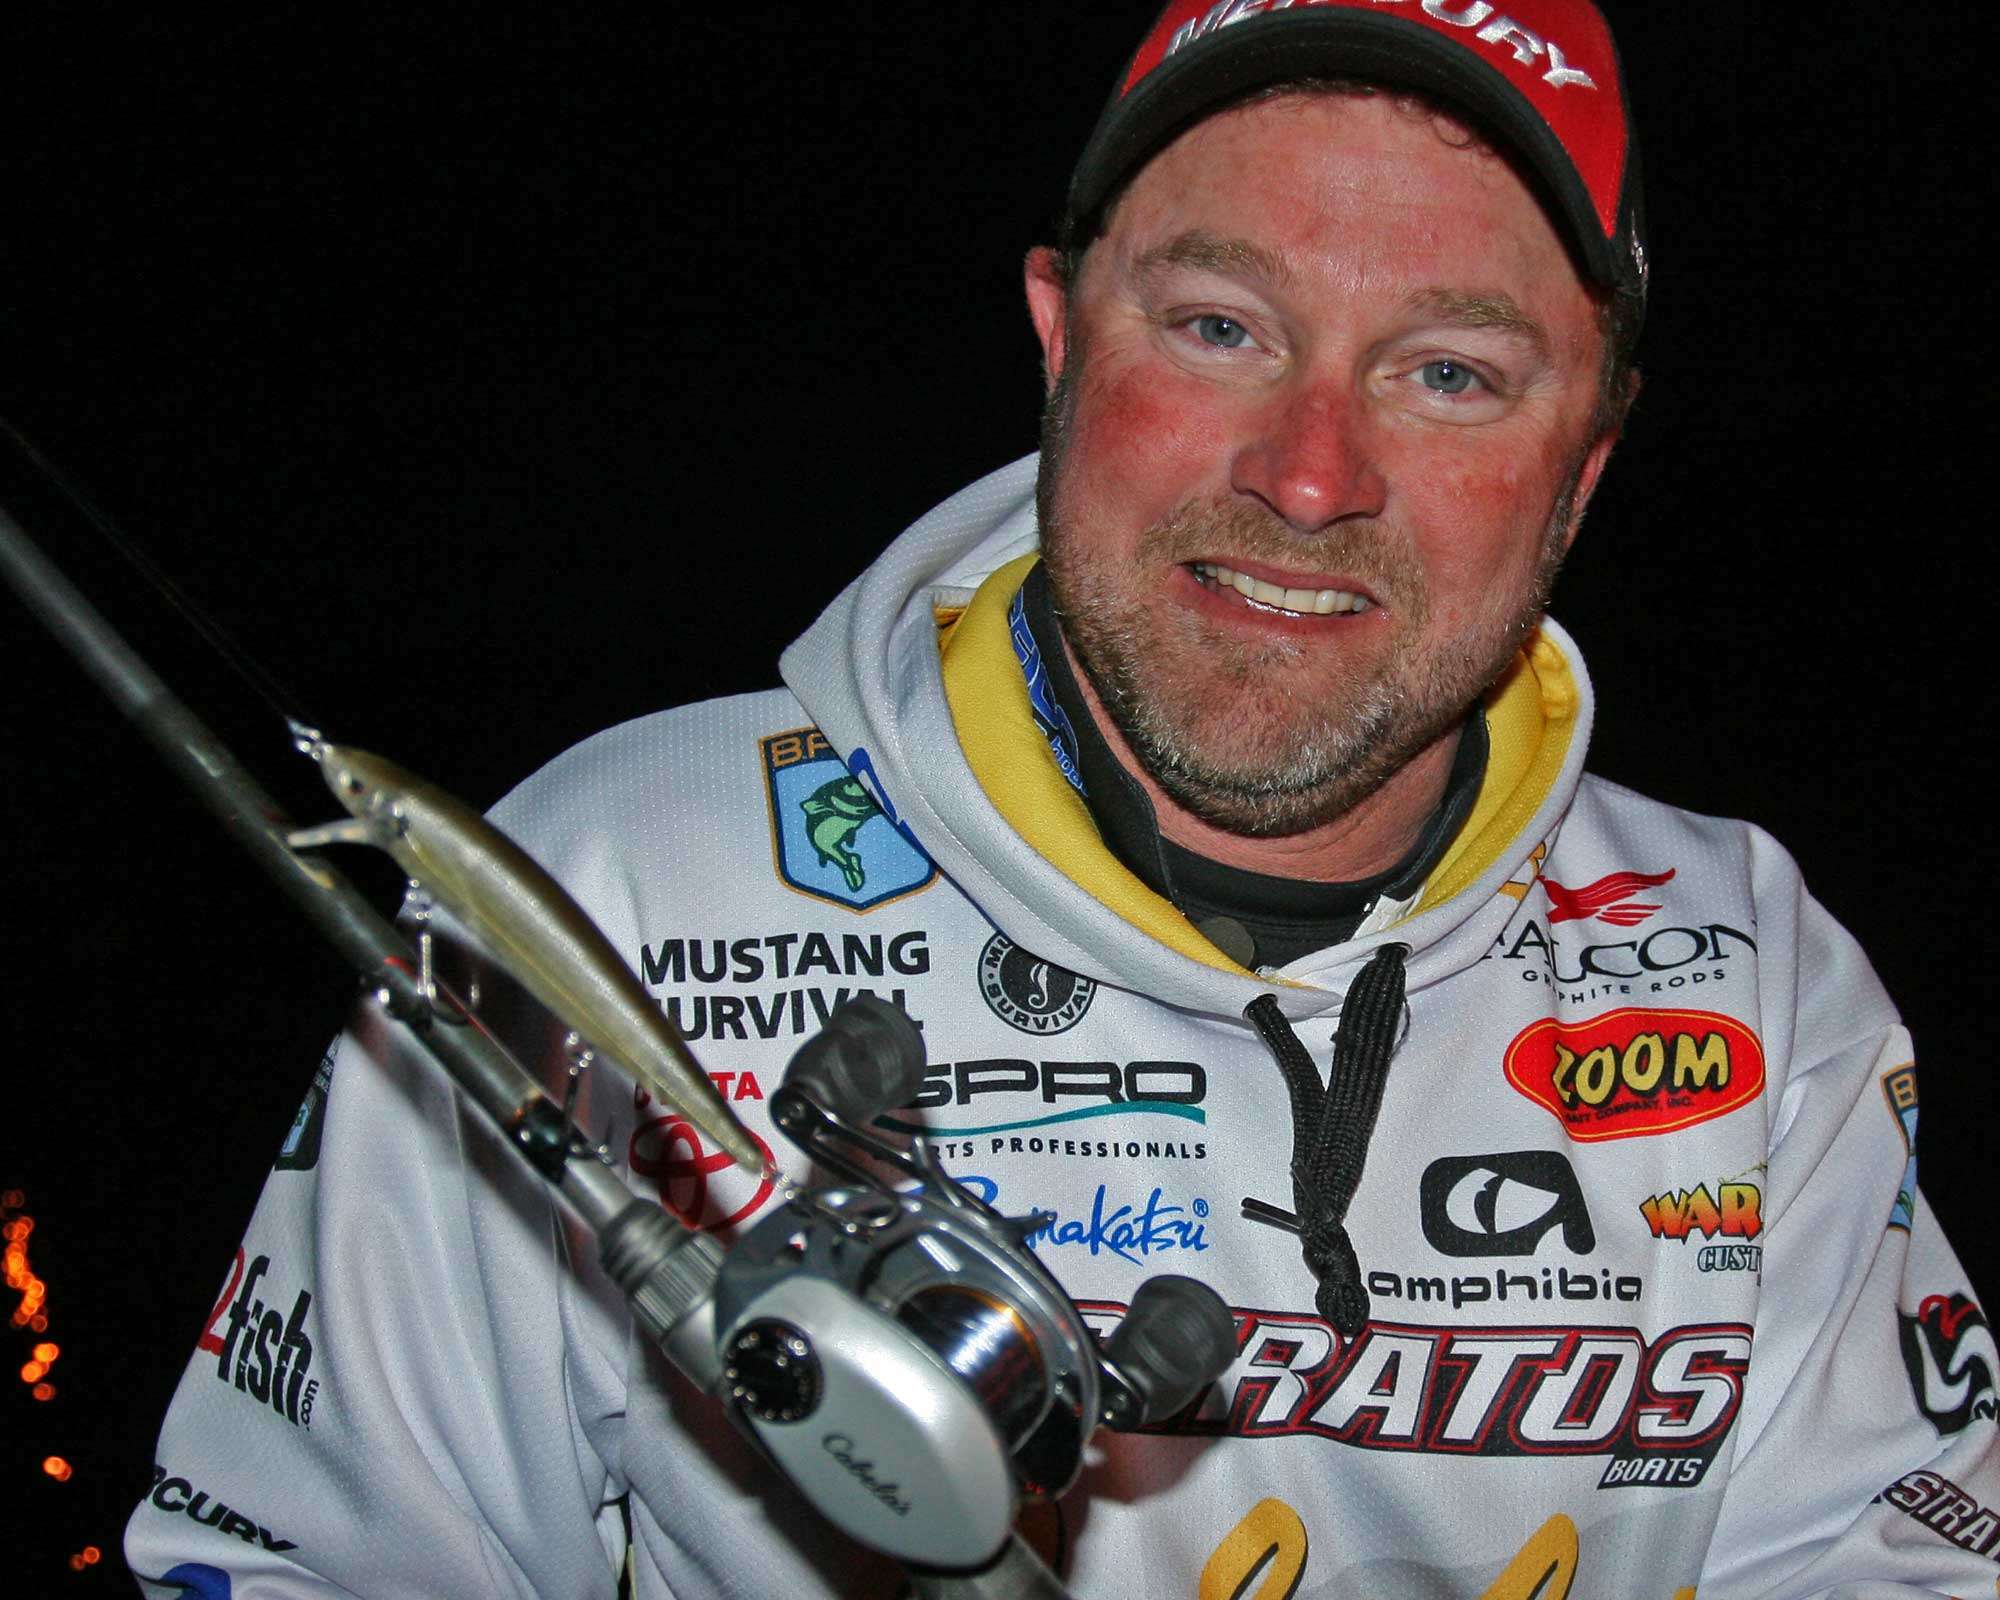 For the majority of the weekend, Mike McClelland had a 1-2 punch between a Spro McStick 110 and 115 jerkbait in colors like Clear/Chartreuse and Natural Herring. His second punch came from a Wiggle Wart in Phantom Brown and Orange colors predominantly.